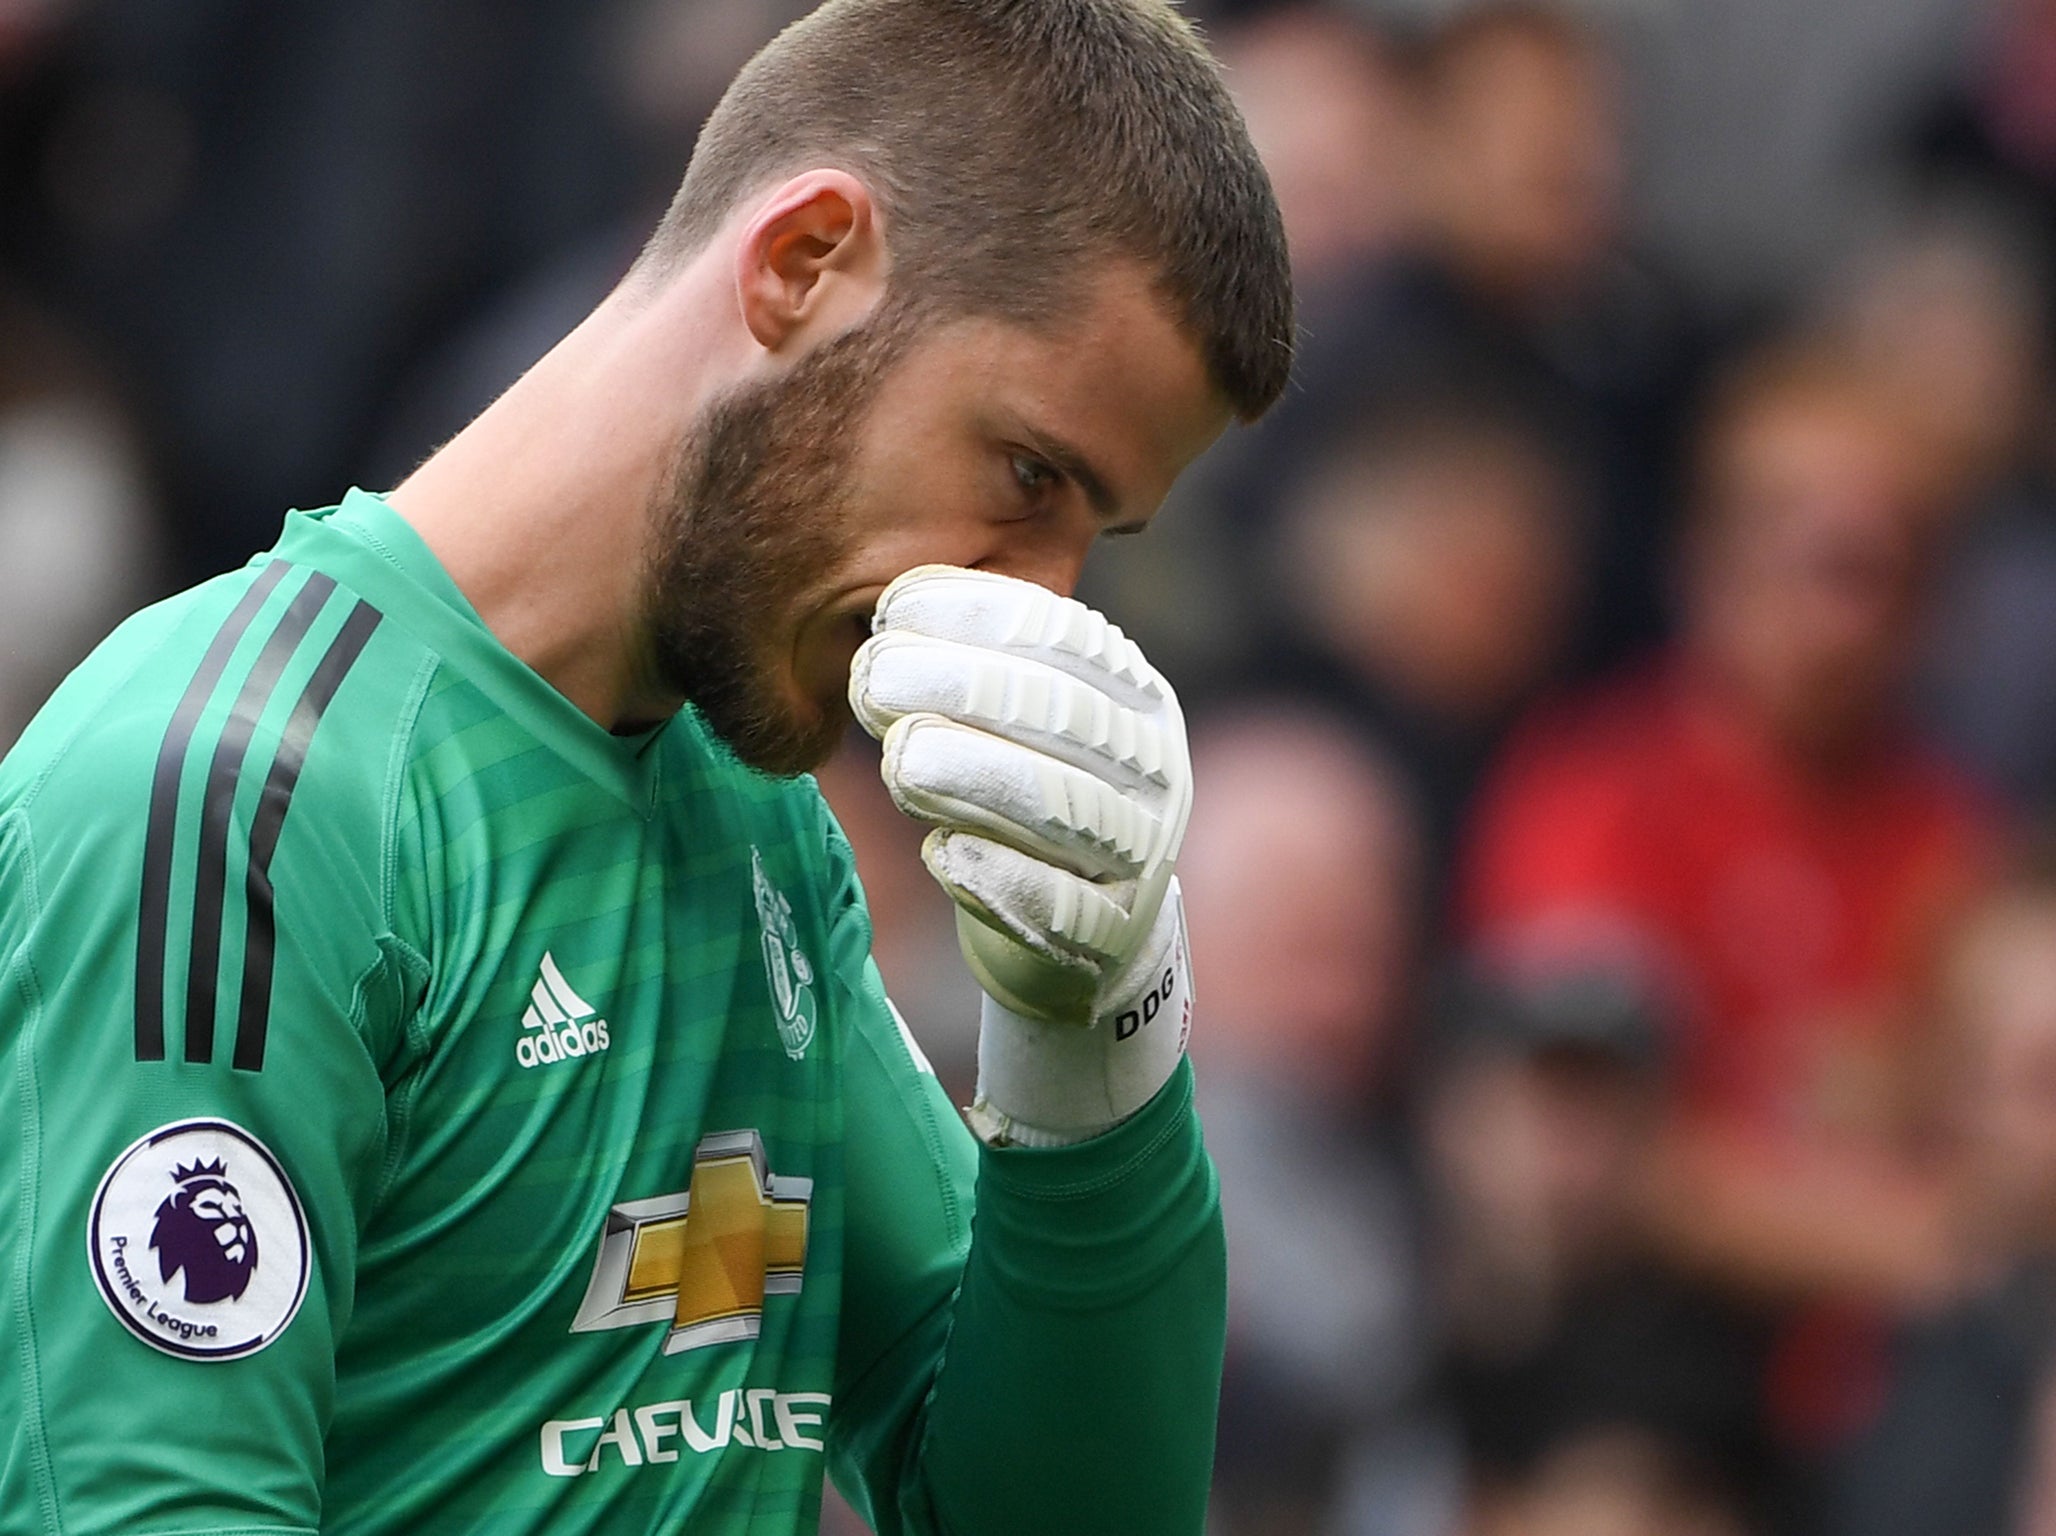 Manchester United vs Chelsea player ratings: David de Gea struggles as Marcos Alonso grabs point